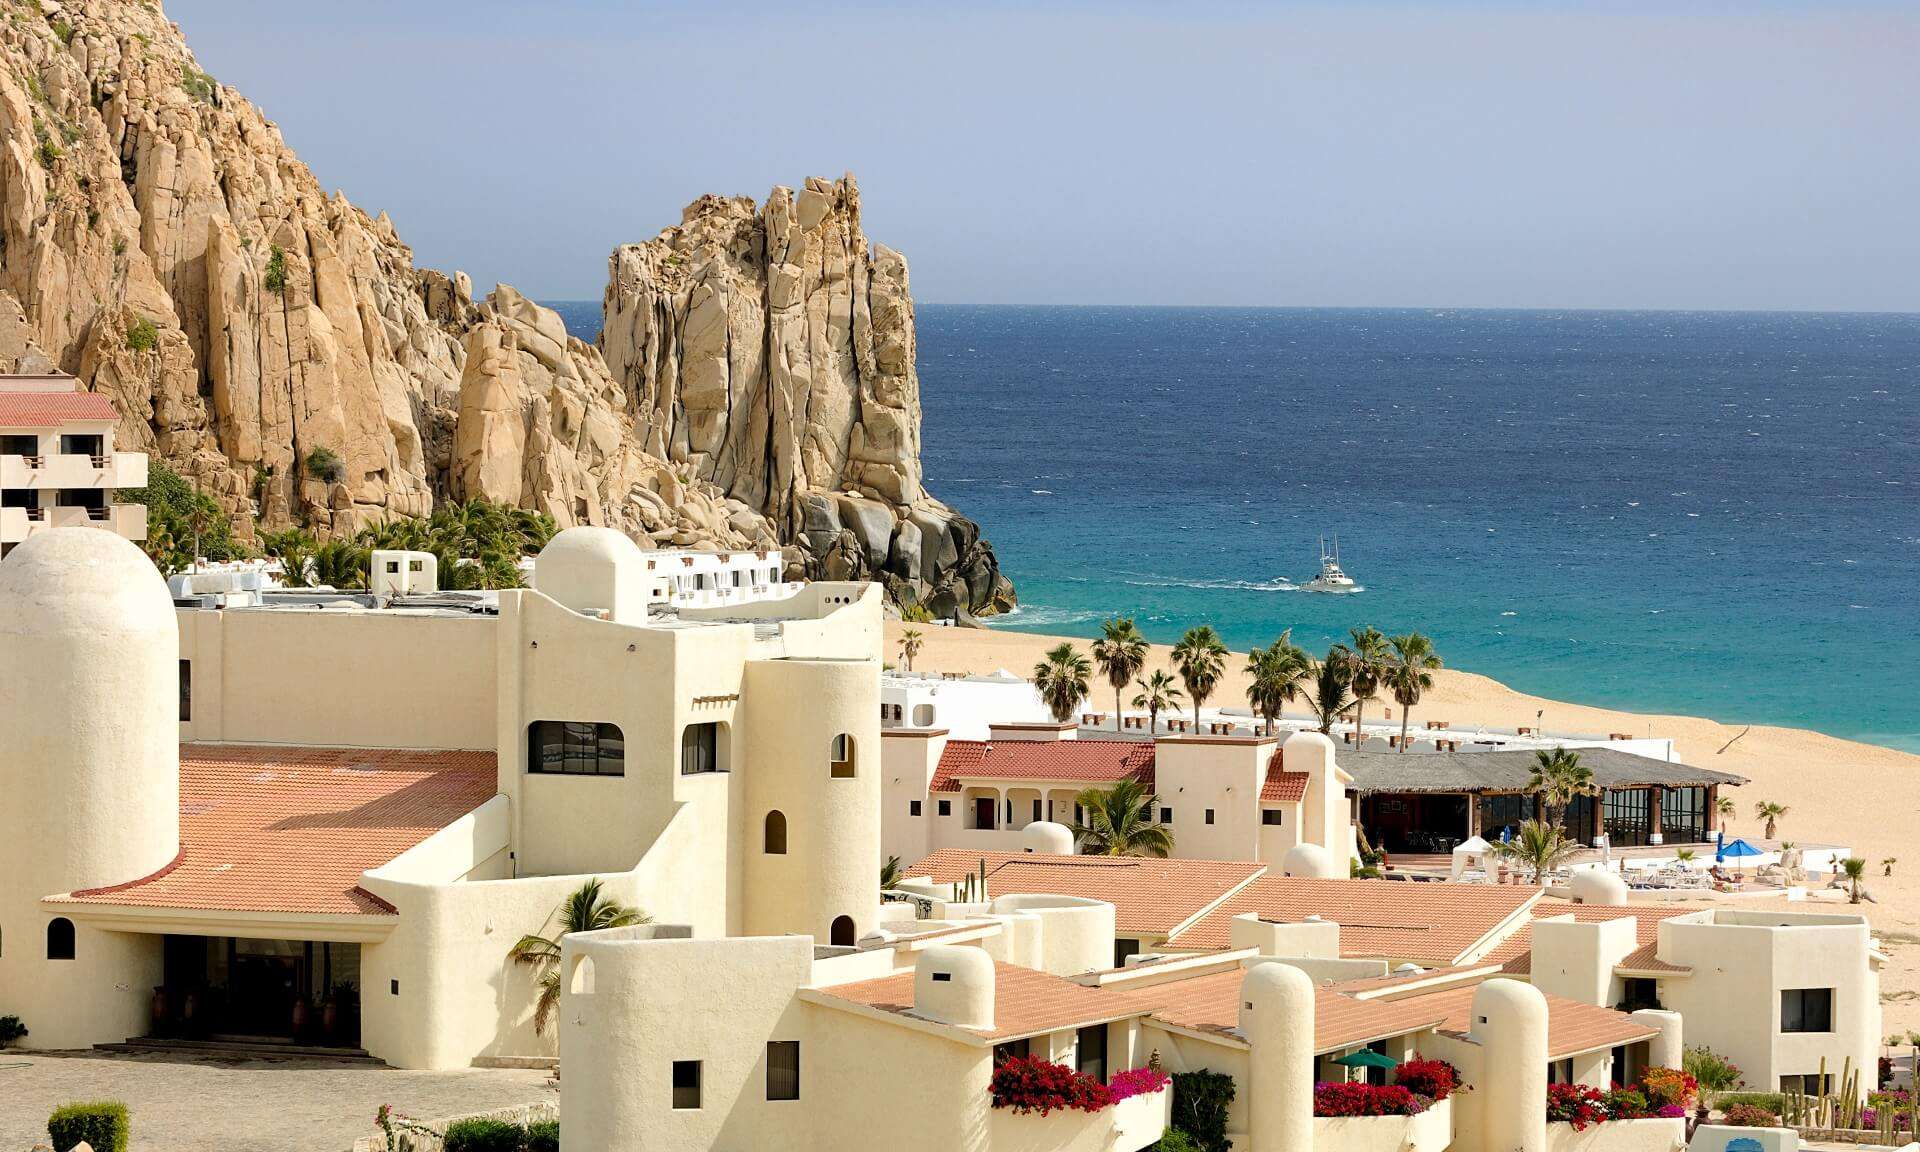 Cabo Luxury Condos for sale